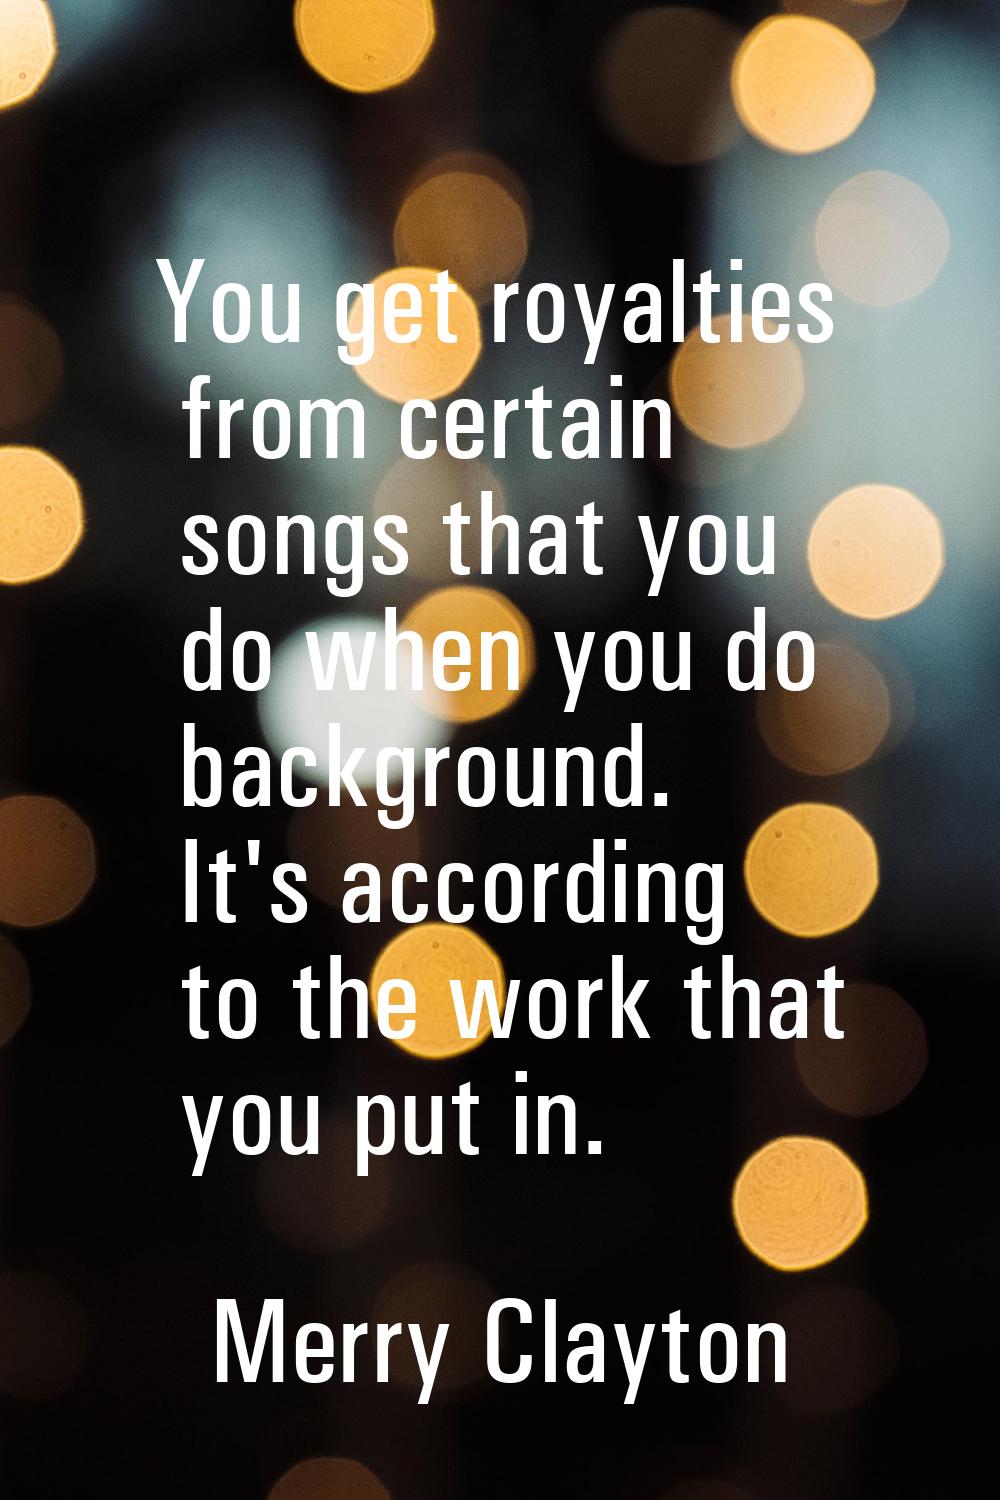 You get royalties from certain songs that you do when you do background. It's according to the work